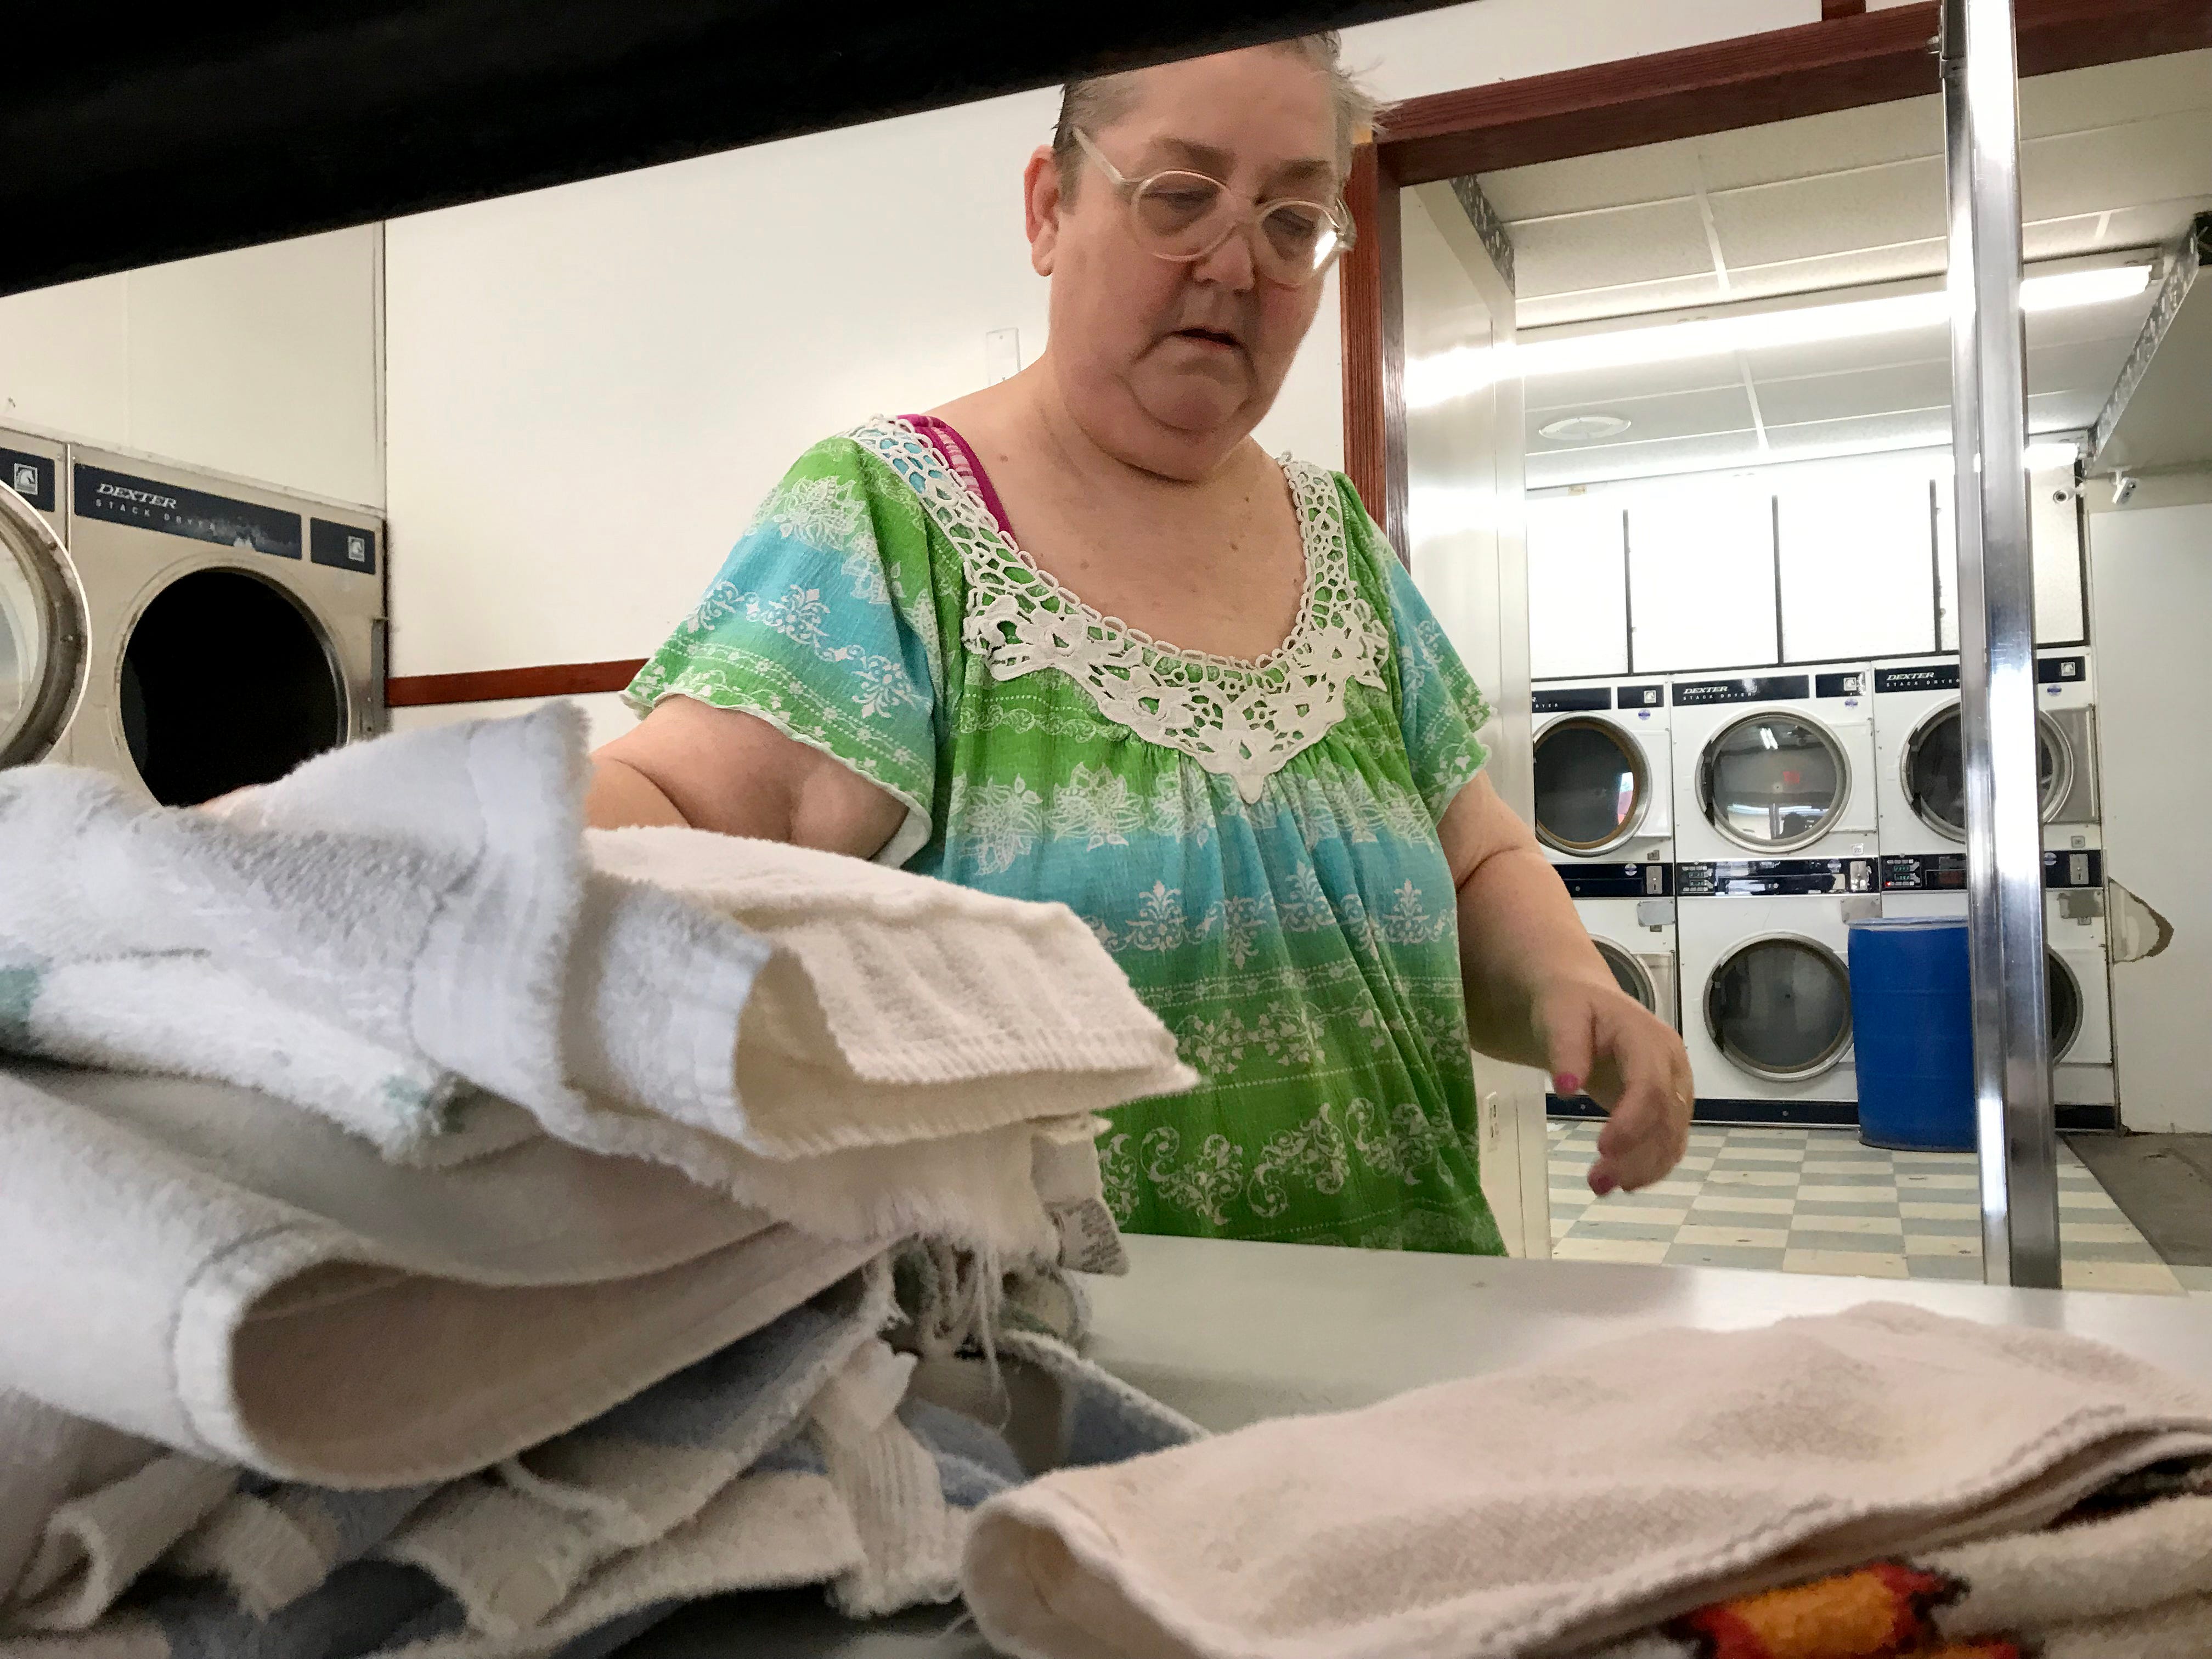 Roxie Cotton folds towels at a laundromat.